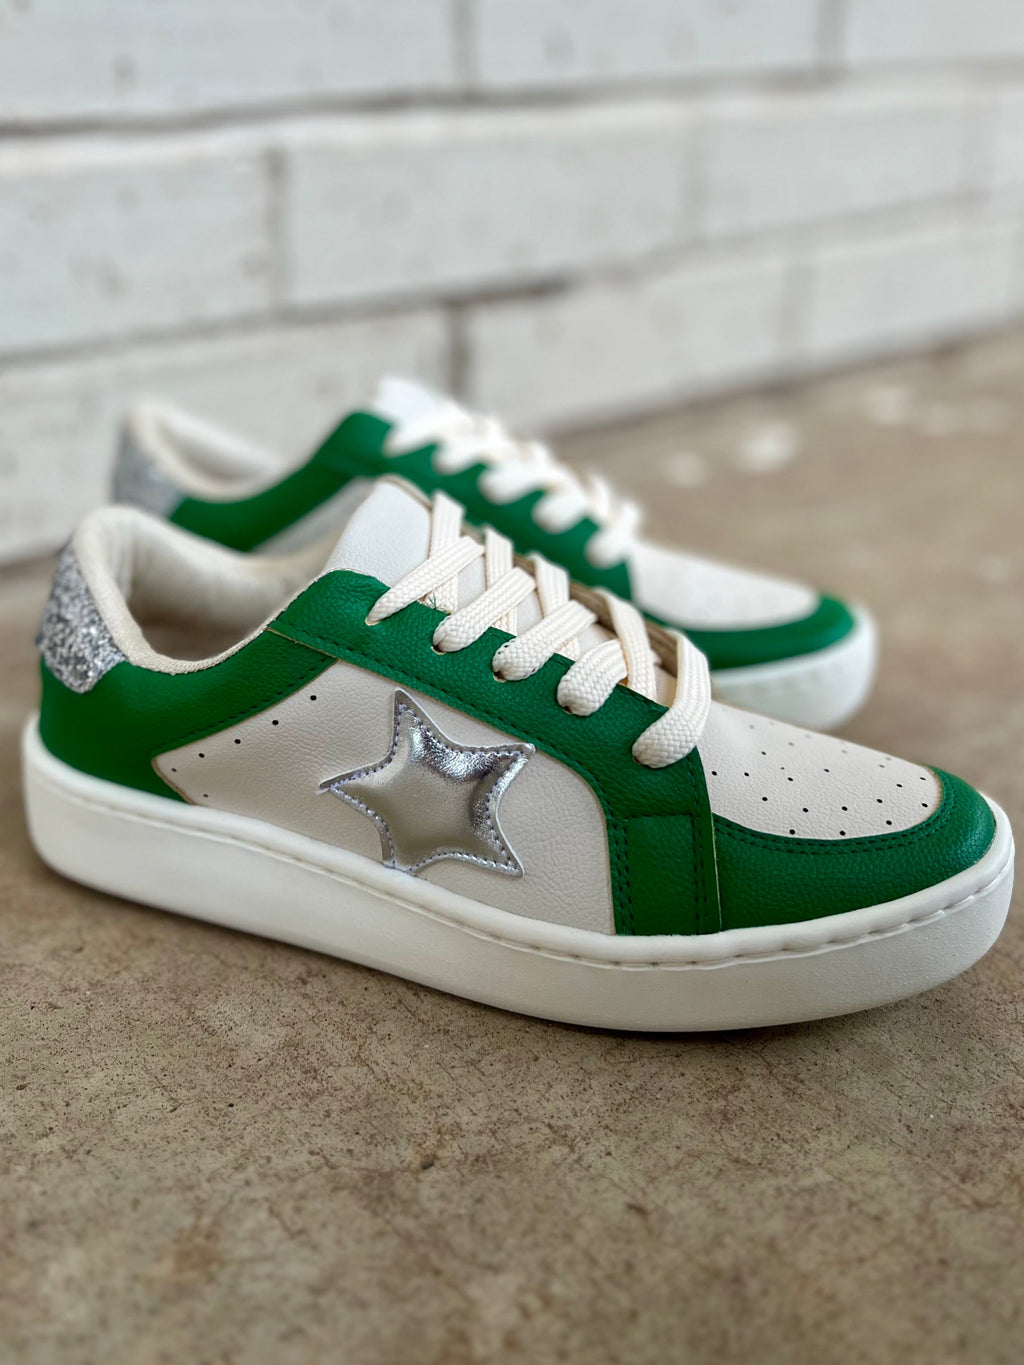 Green and white sneakers. Silver sneakers with a star on the side. Green sneakers. Golden Goose dupes. Affordable sneakers. Trendy sneakers. Game day sneakers. School spirit sneakers. Cheerleading sneakers. White sneakers. Silver star sneakers. Shoes. Sneakers. Women's shoes. Boutique. Women's boutique. Trendy boutique. 